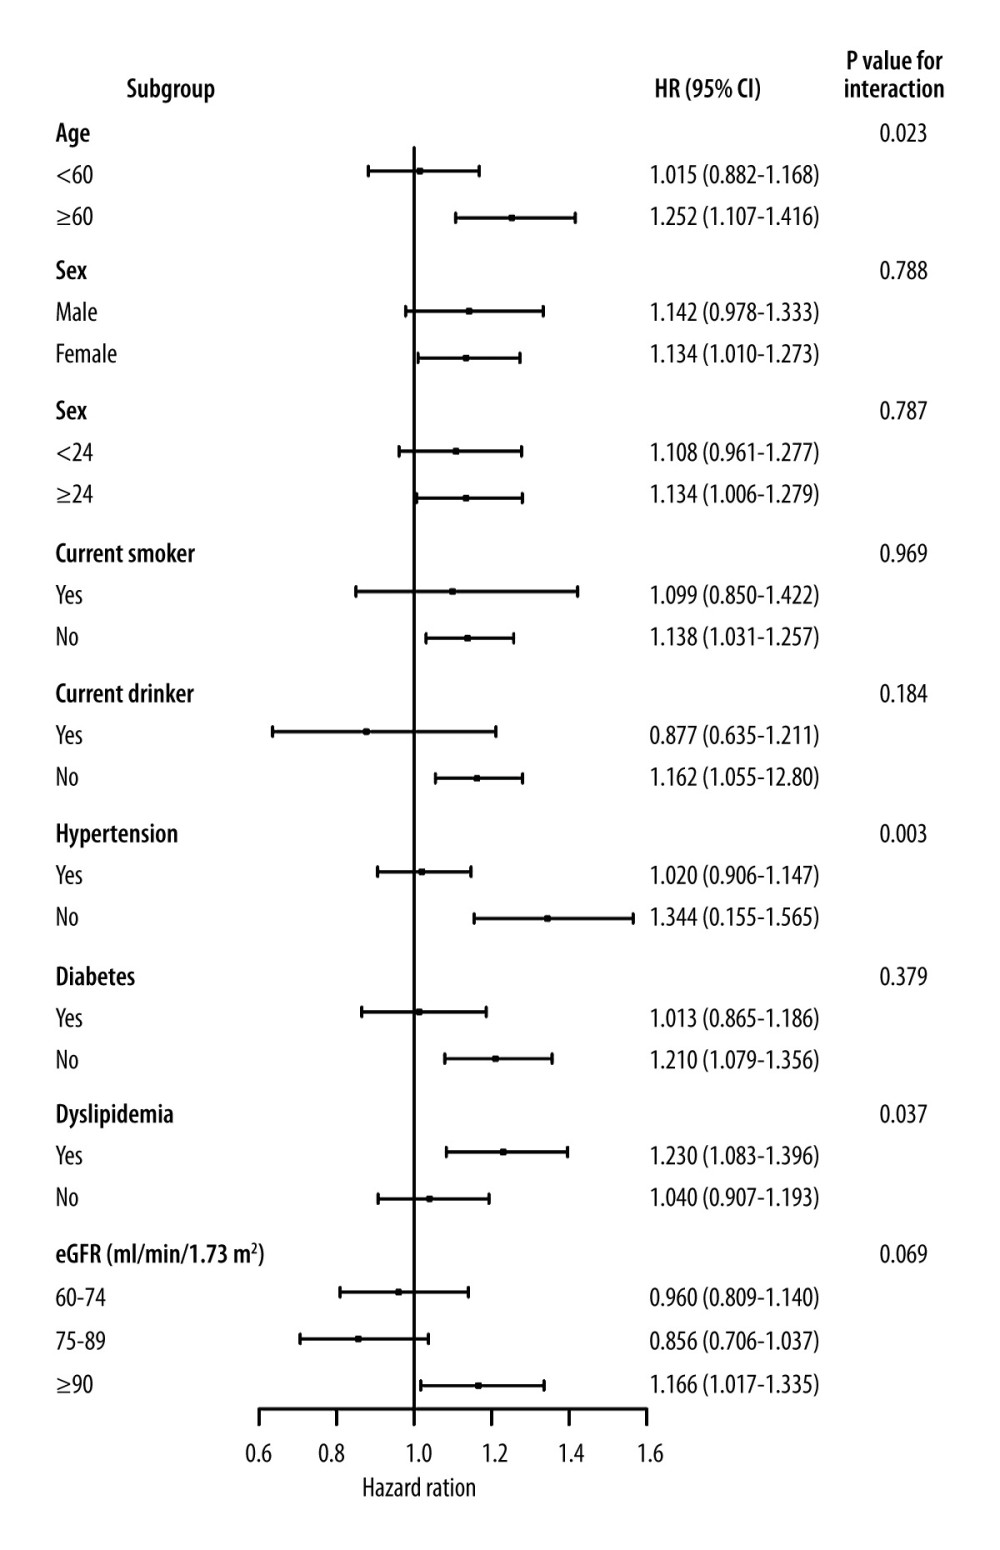 Subgroup analyses for the association between sitting time and kidney function decline. Hazard ratios for risk of incident kidney function decline are for the comparison of individuals with sitting time in the highest quartile with those in the lowest quartile, stratified by age group (<60 and ≥60 years), sex (male and female), BMI category (<24 and ≥24), current smoking (yes or no), current drinking (yes or no), hypertension (yes or no), diabetes (yes or no), dyslipidemia (yes or no) and baseline eGFR (60–74, 75–89, ≥90 mL/min/1.73 m2). The Cox models were adjusted for age, sex, current smoking, current drinking, BMI, hypertension, diabetes, dyslipidemia, and MVPA, except for the stratifying factor. BMI – body mass index; HR – hazard ratio; CI – confidence interval. Created using R version 3.4.2.